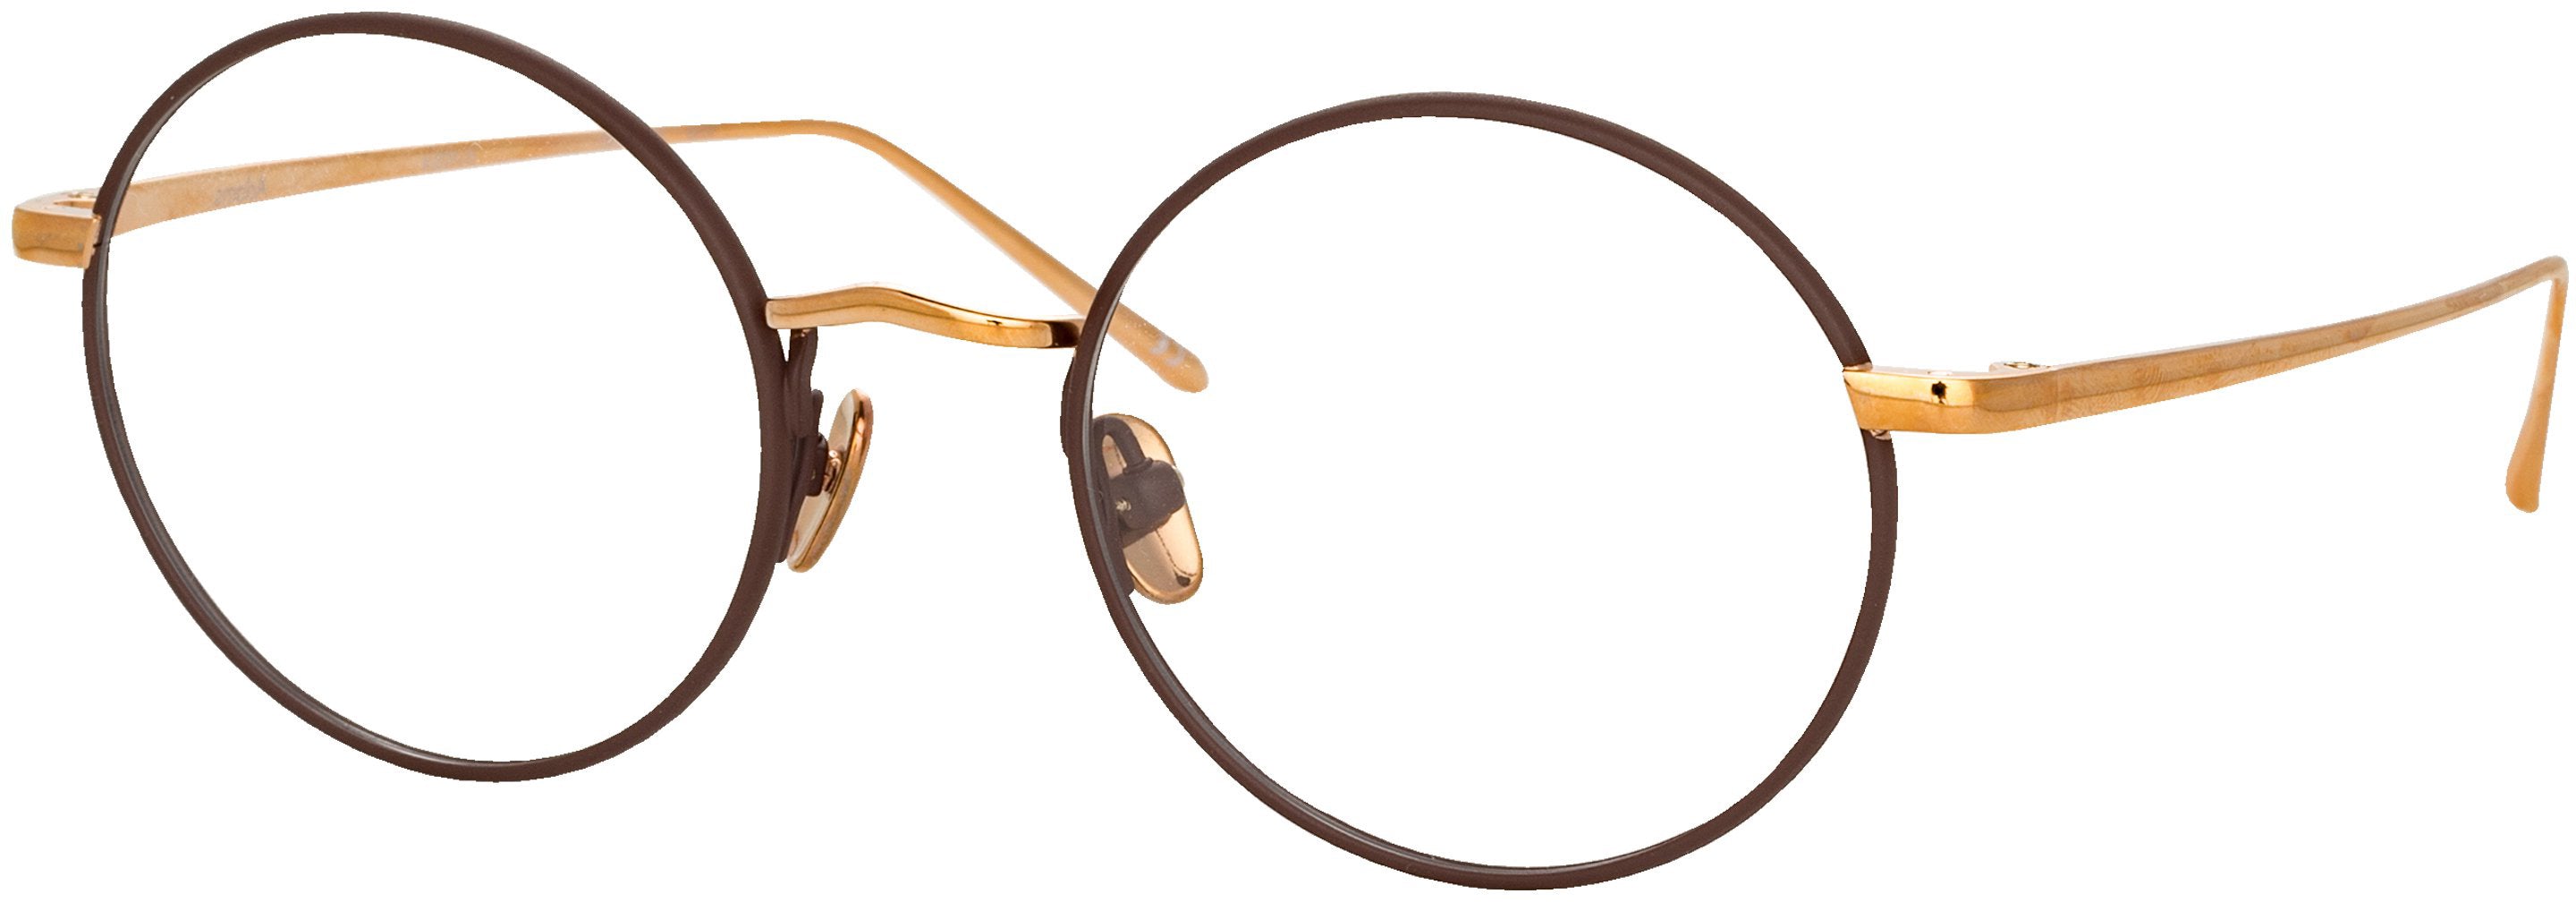 Color_LFL925C4OPT - Adams Oval Optical Frame in Brown and Rose Gold